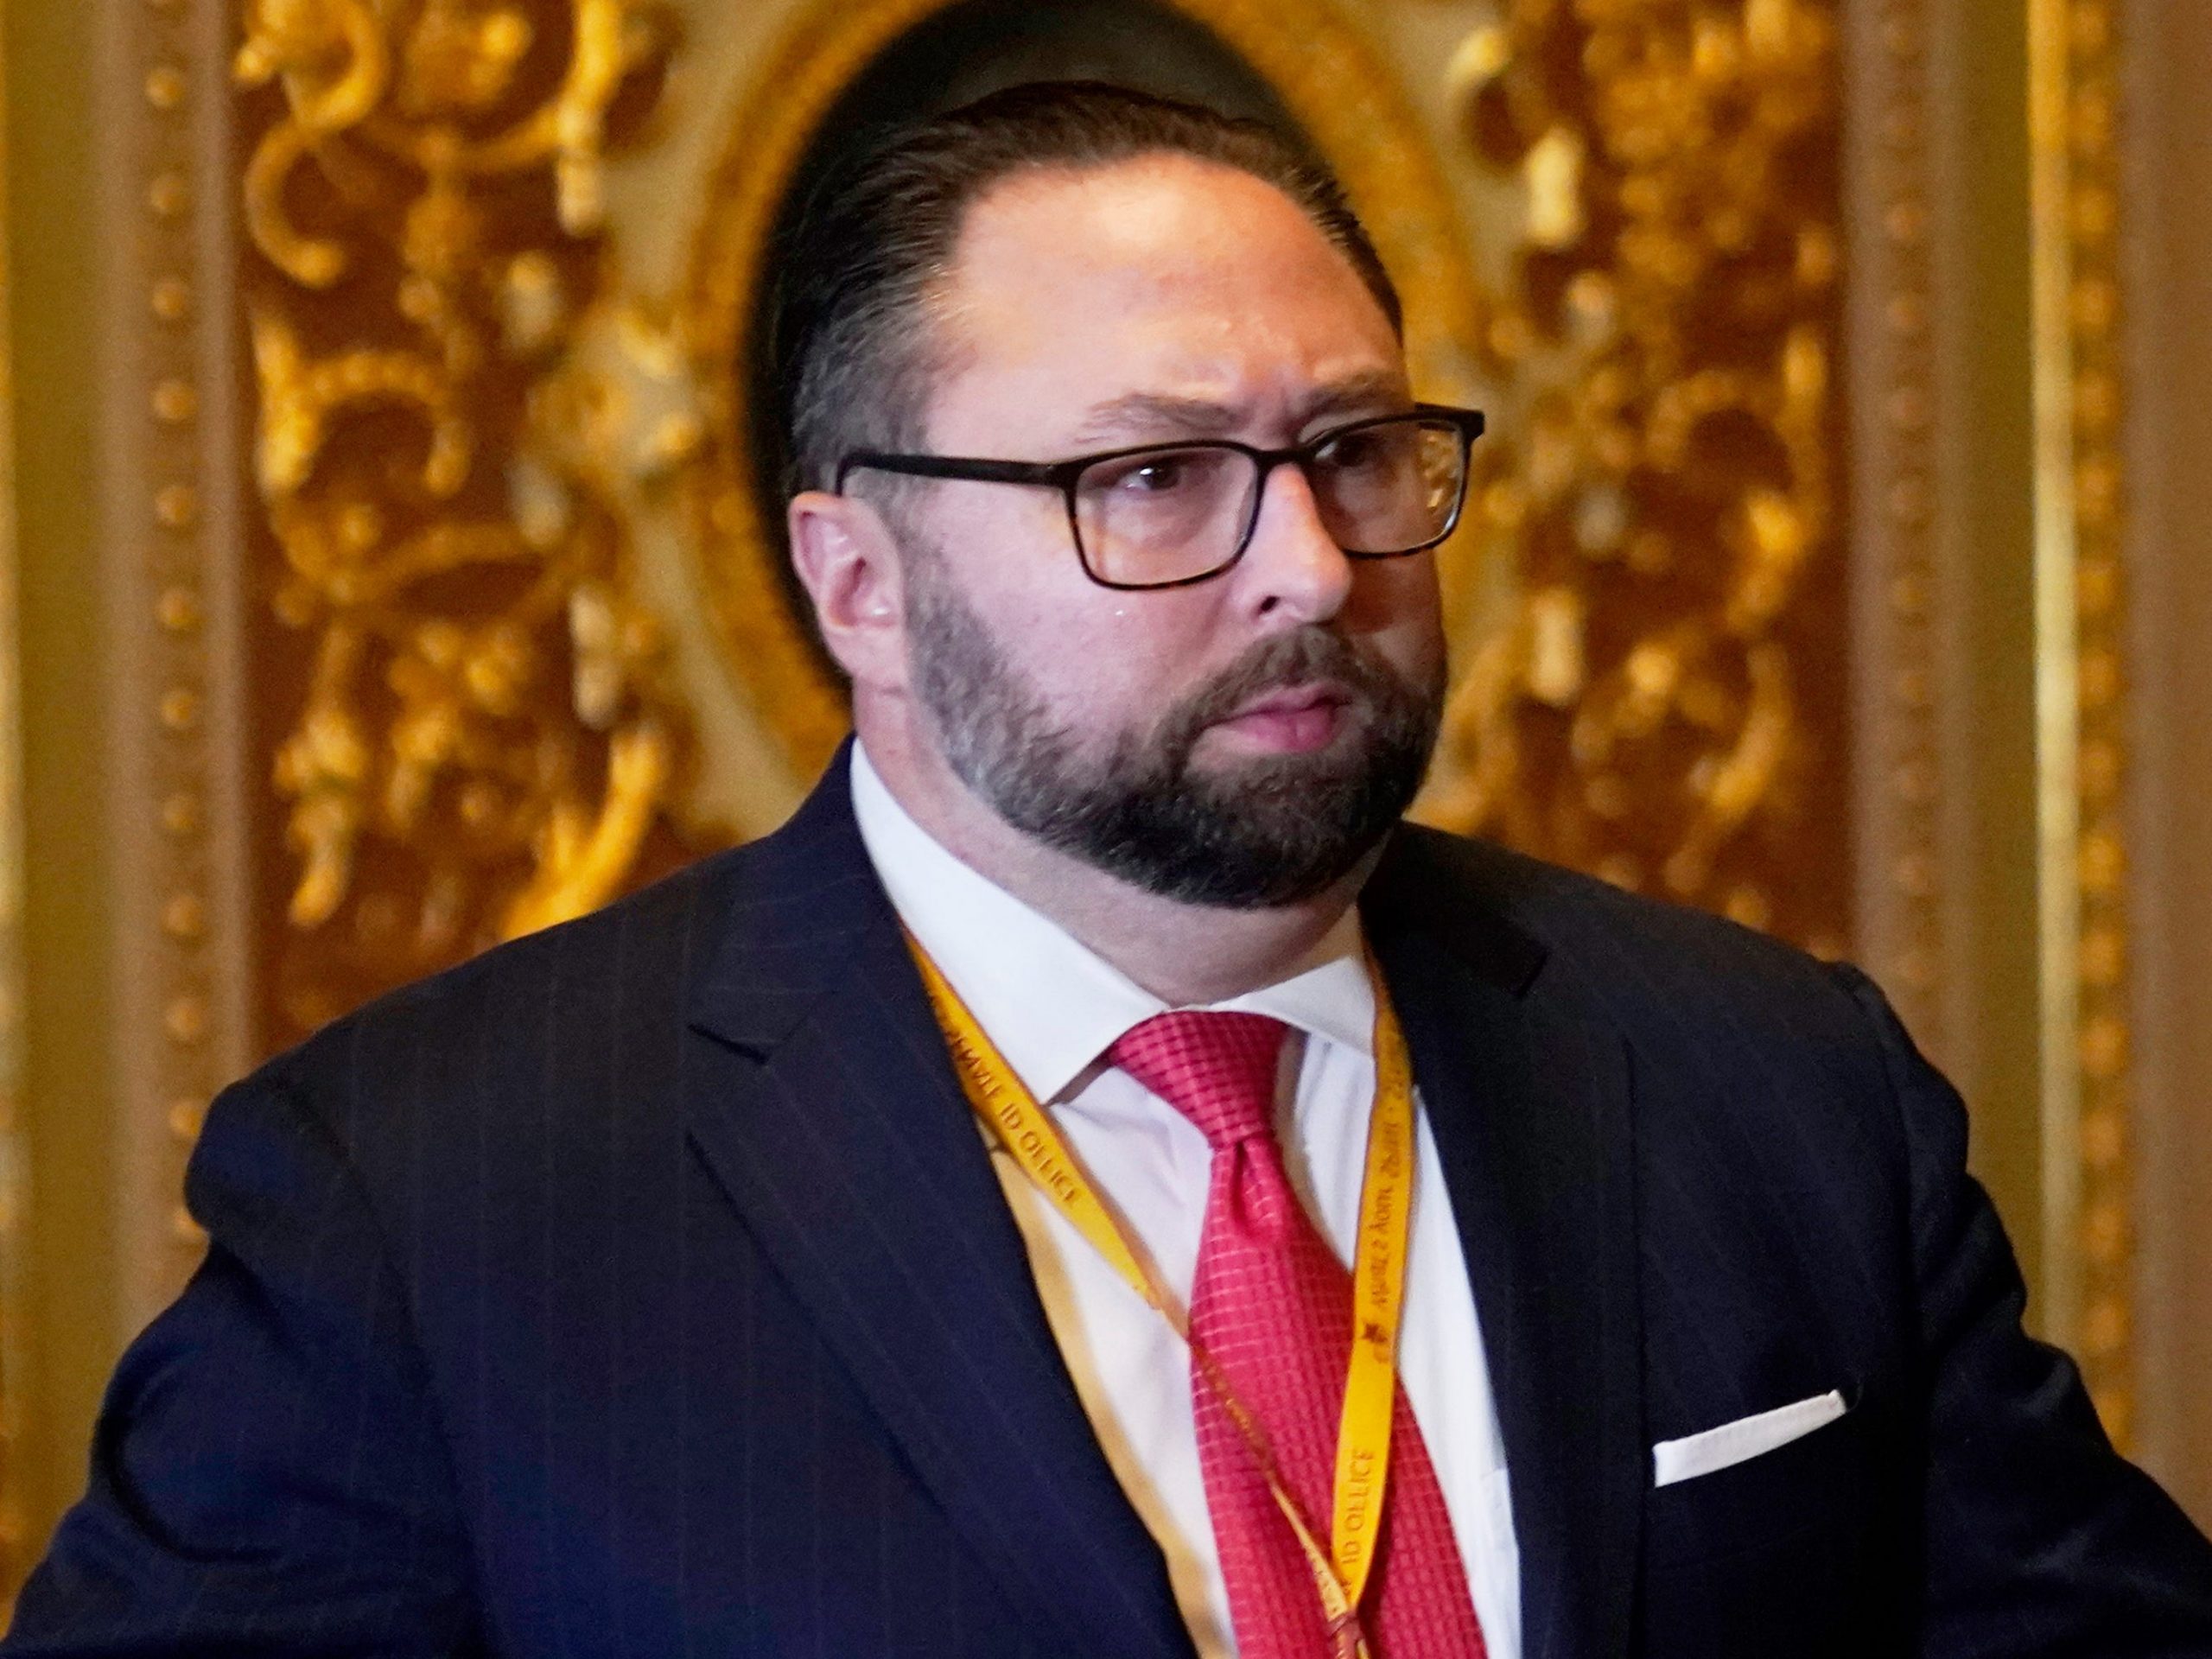 Jason Miller, Senior Adviser to the Trump 2020 re-election campaign, appears for the second impeachment trial of former President Donald Trump in the Senate, at the Capitol in Washington, on Feb. 9, 2021.